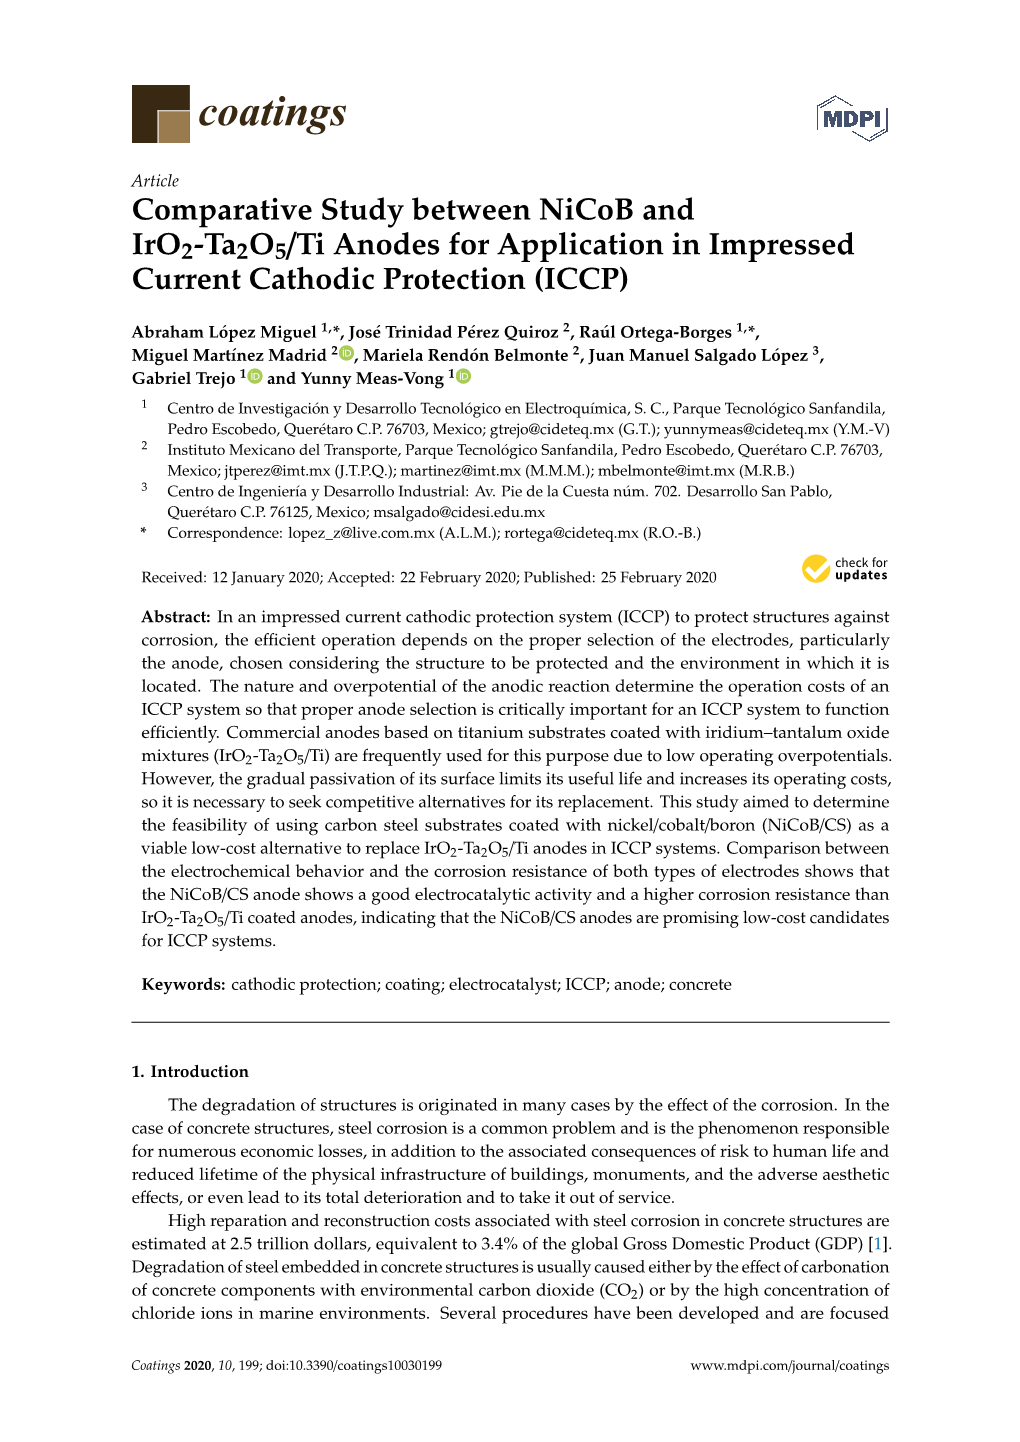 Comparative Study Between Nicob and Iro2-Ta2o5/Ti Anodes for Application in Impressed Current Cathodic Protection (ICCP)